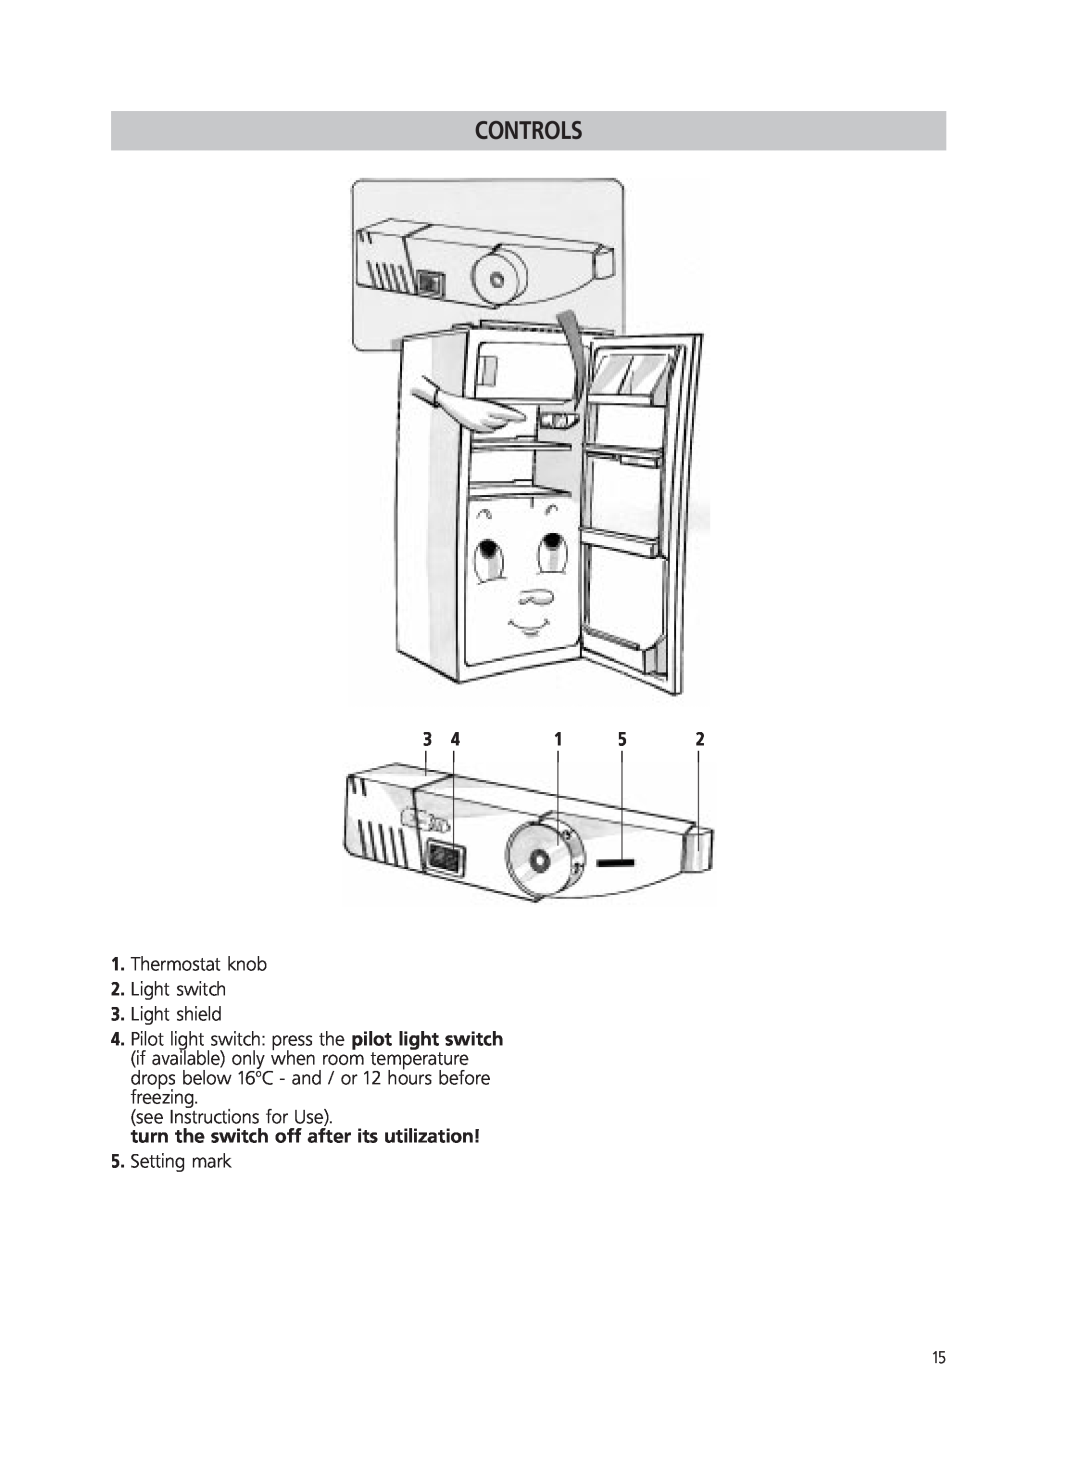 Smeg FR220A manual turn the switch off after its utilization, Controls, Thermostat knob 2.Light switch 3.Light shield 